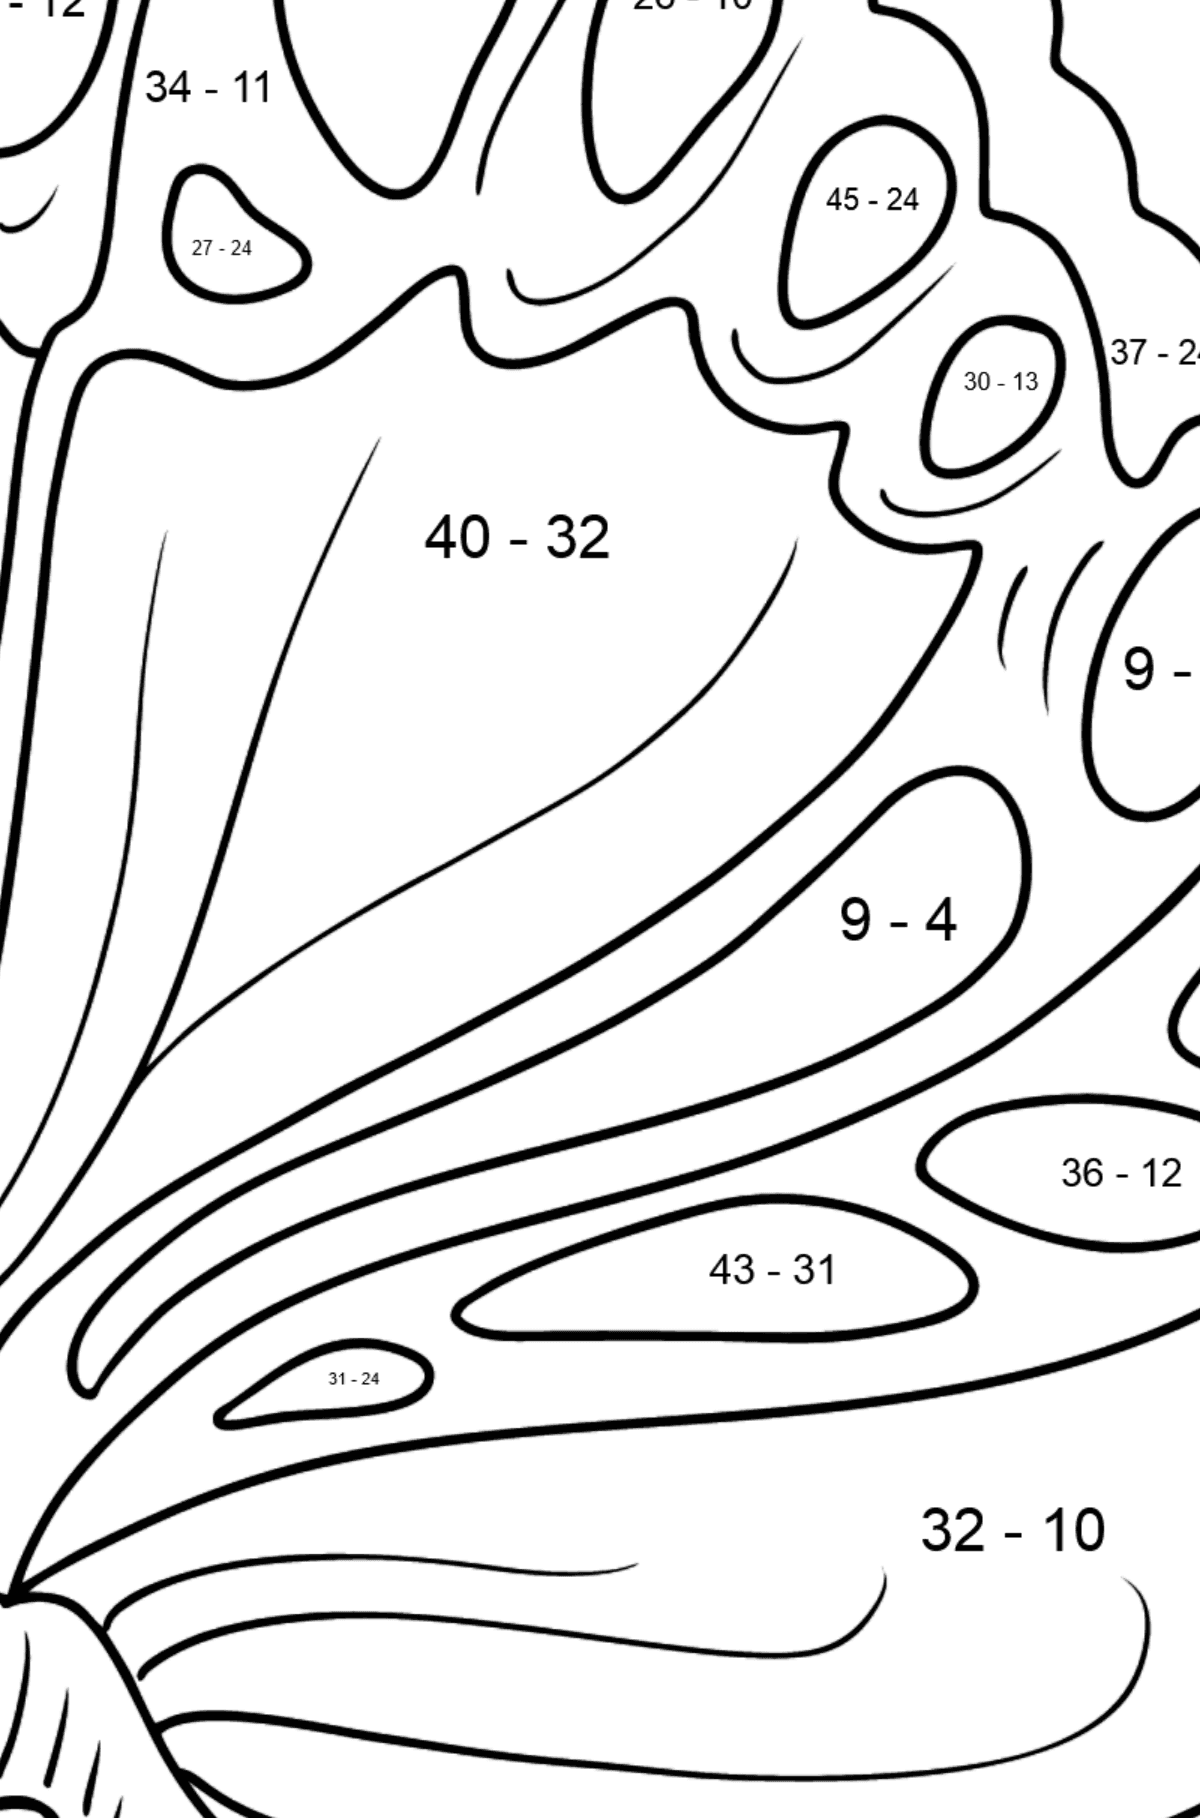 Butterfly Sideways coloring page - Math Coloring - Subtraction for Kids